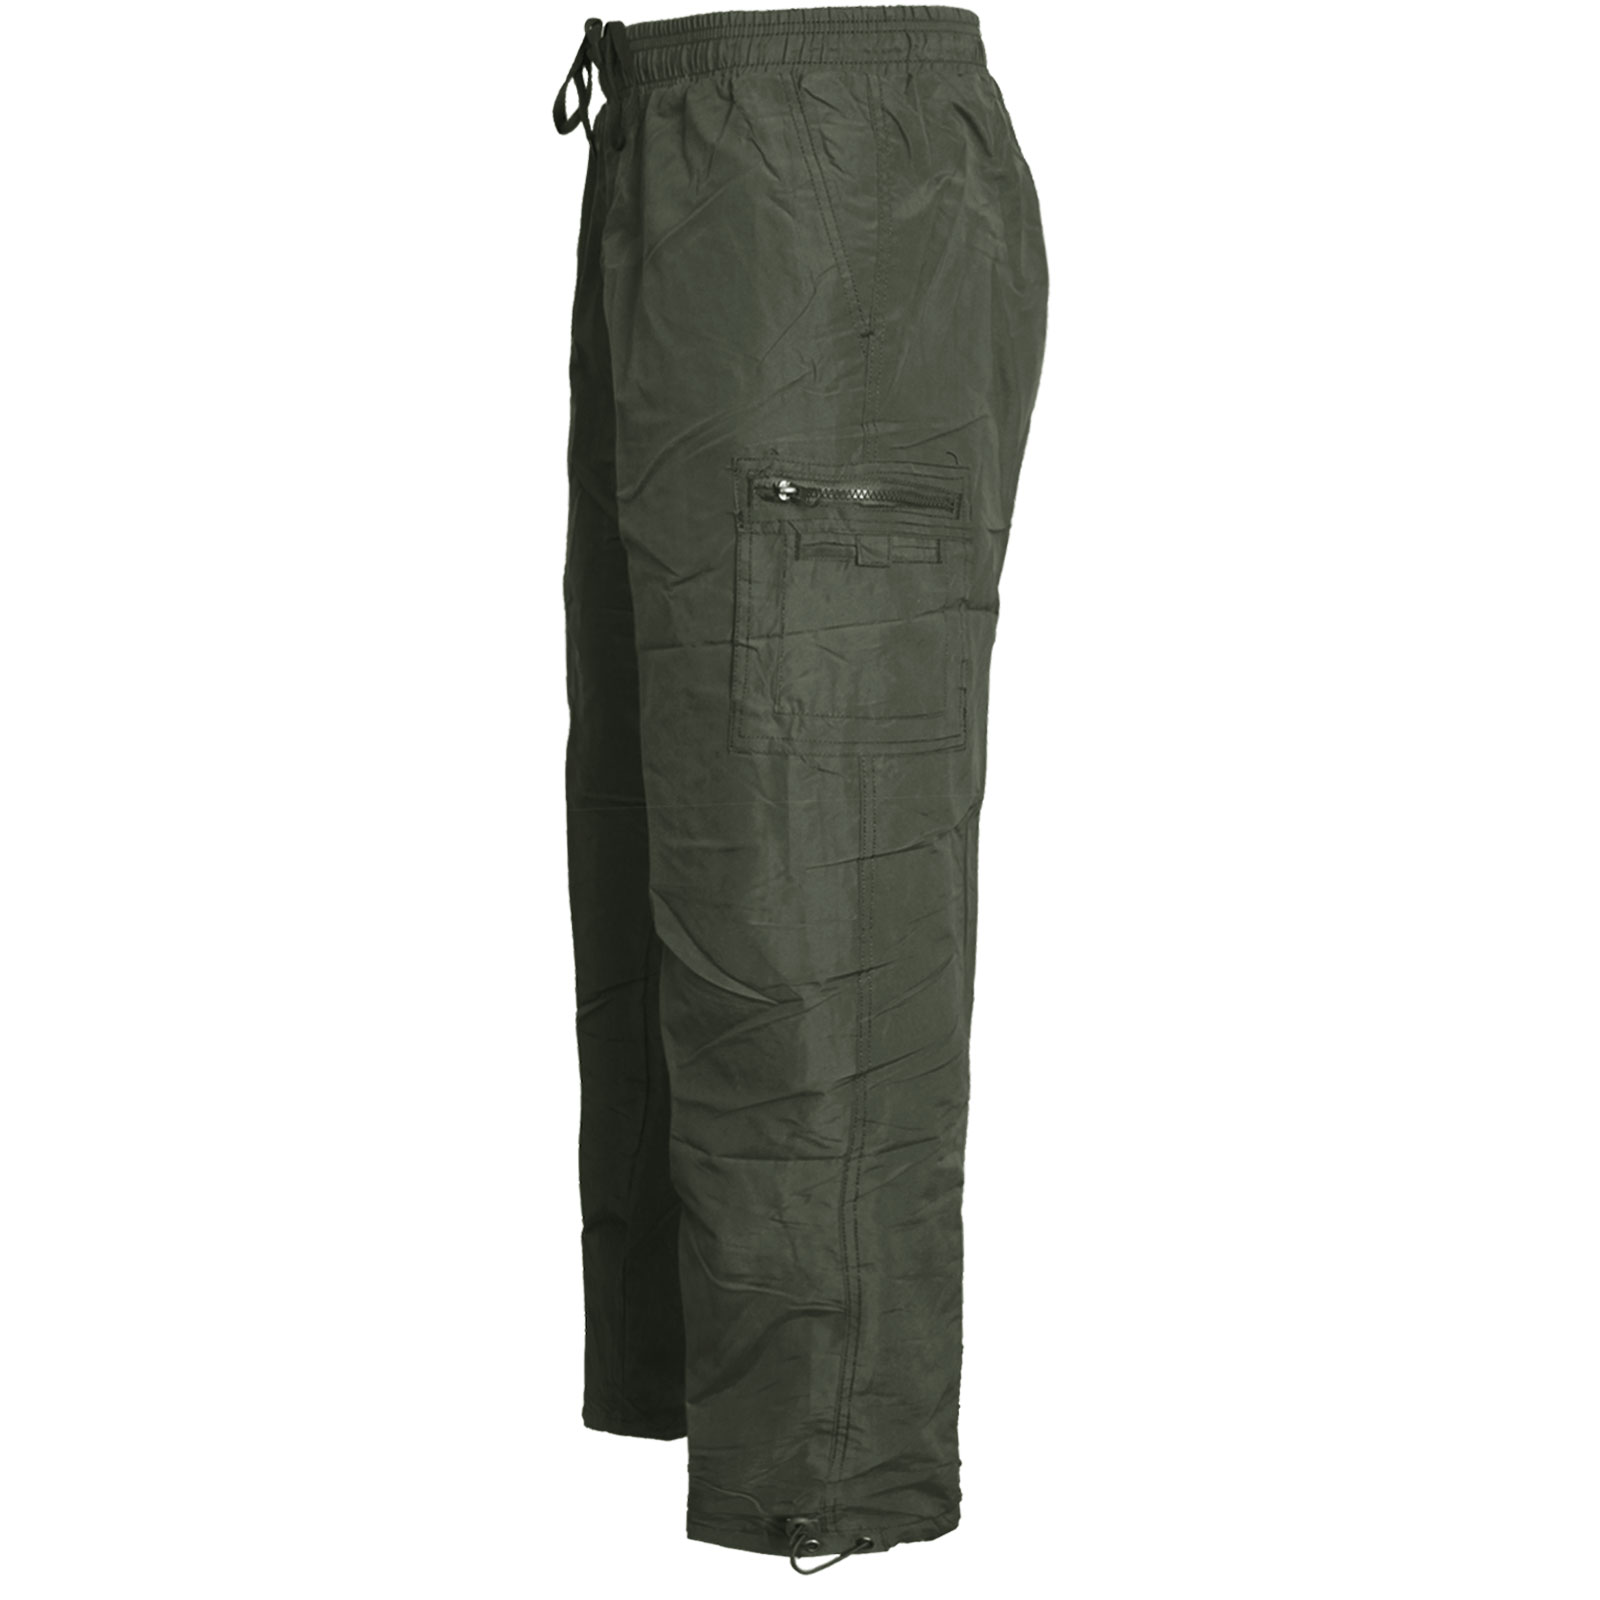 Mens Fleece Lined Cargo Combat Trousers Work Bottoms  Elasticated Thermal Pants